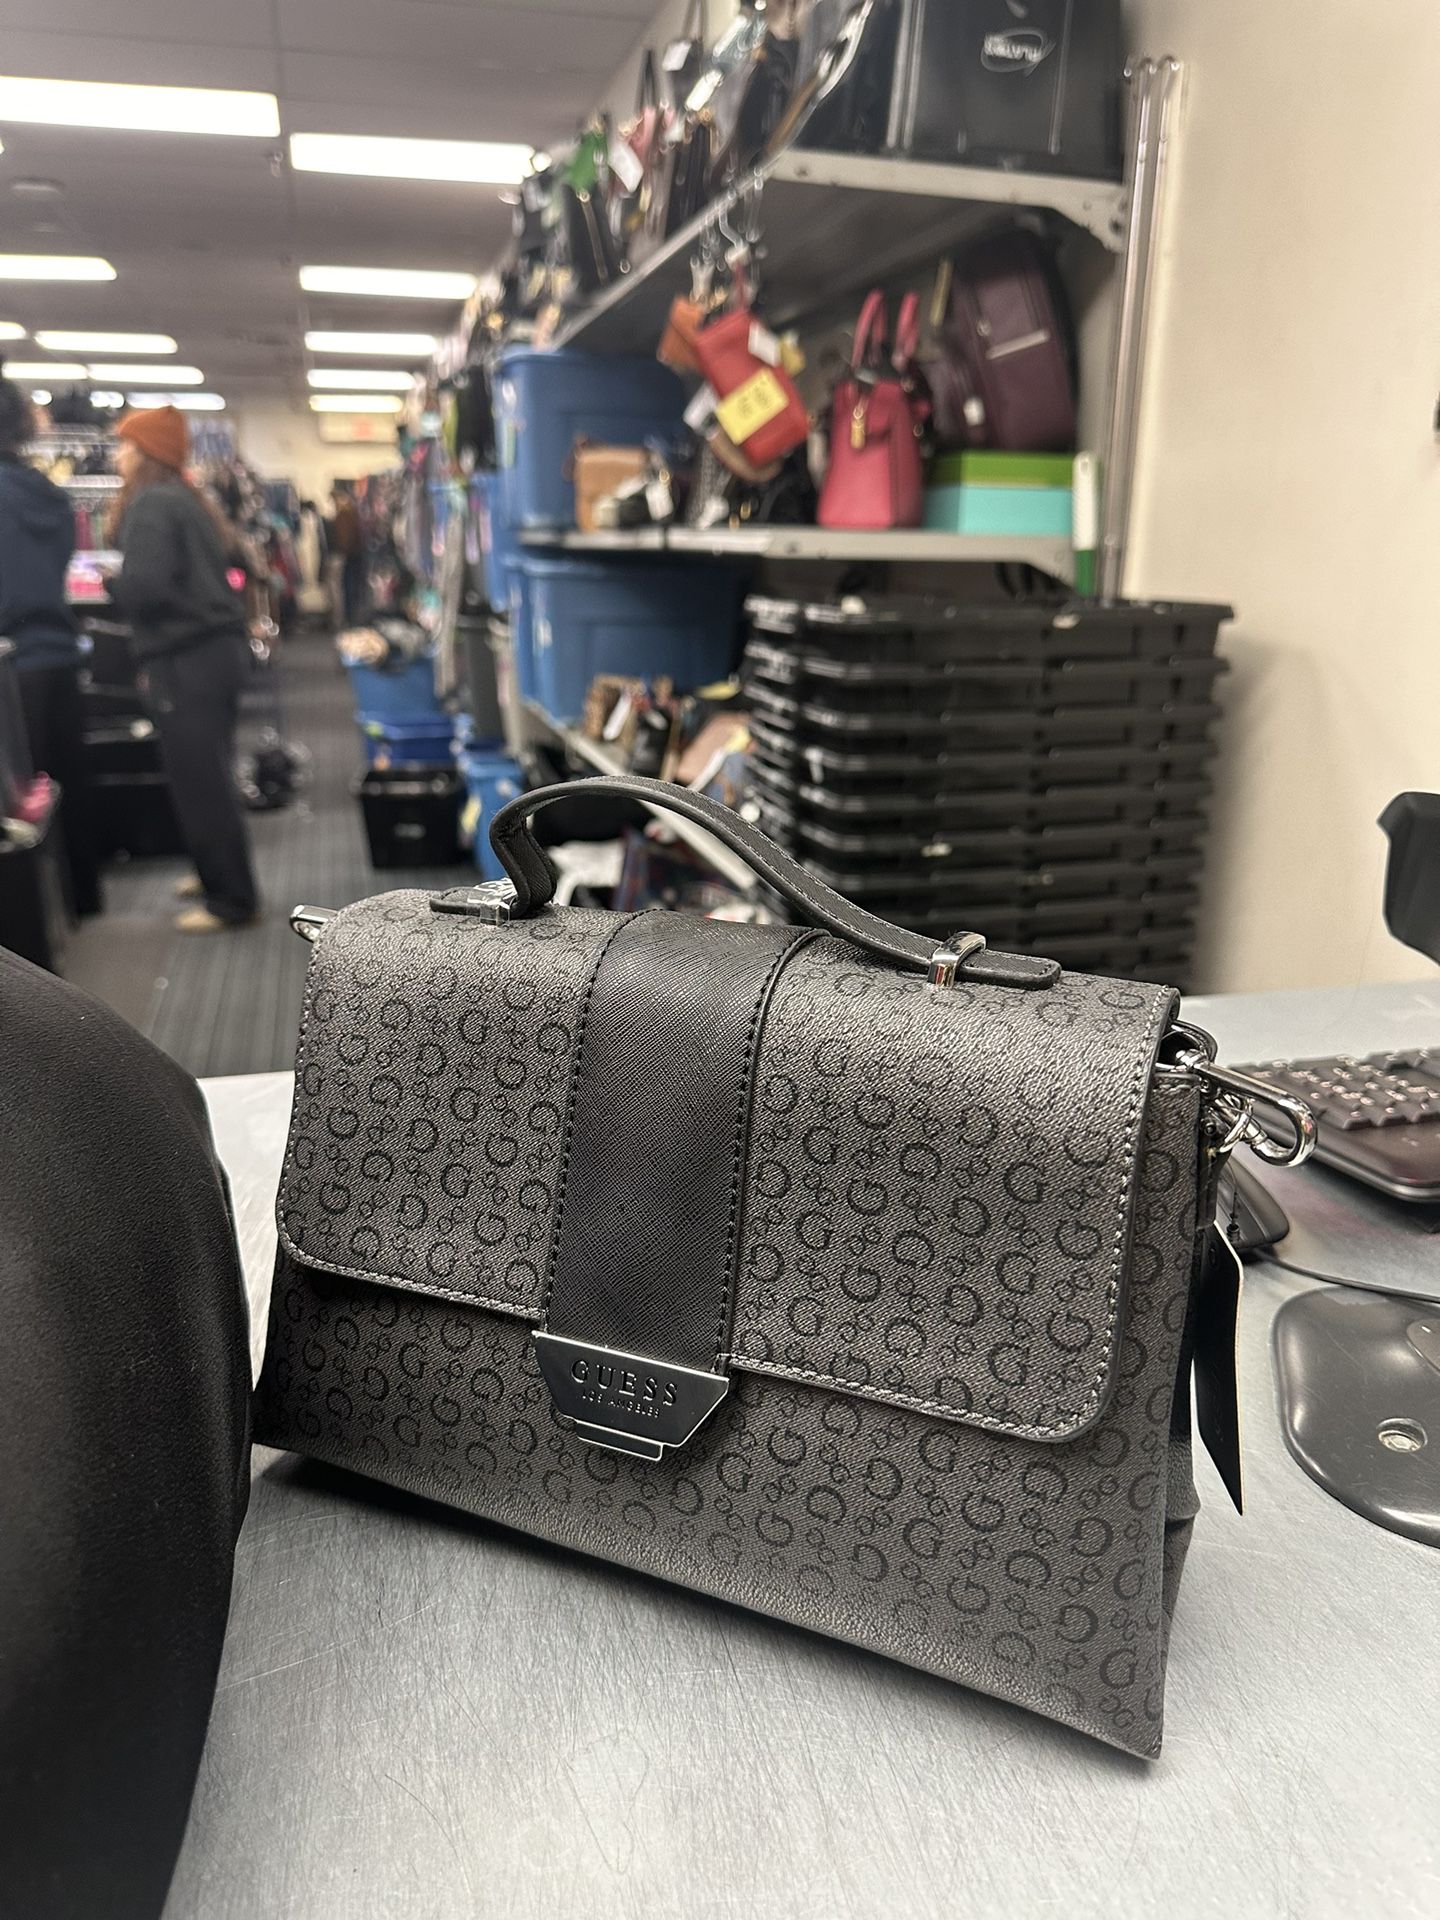 Guess Bag Brand New 